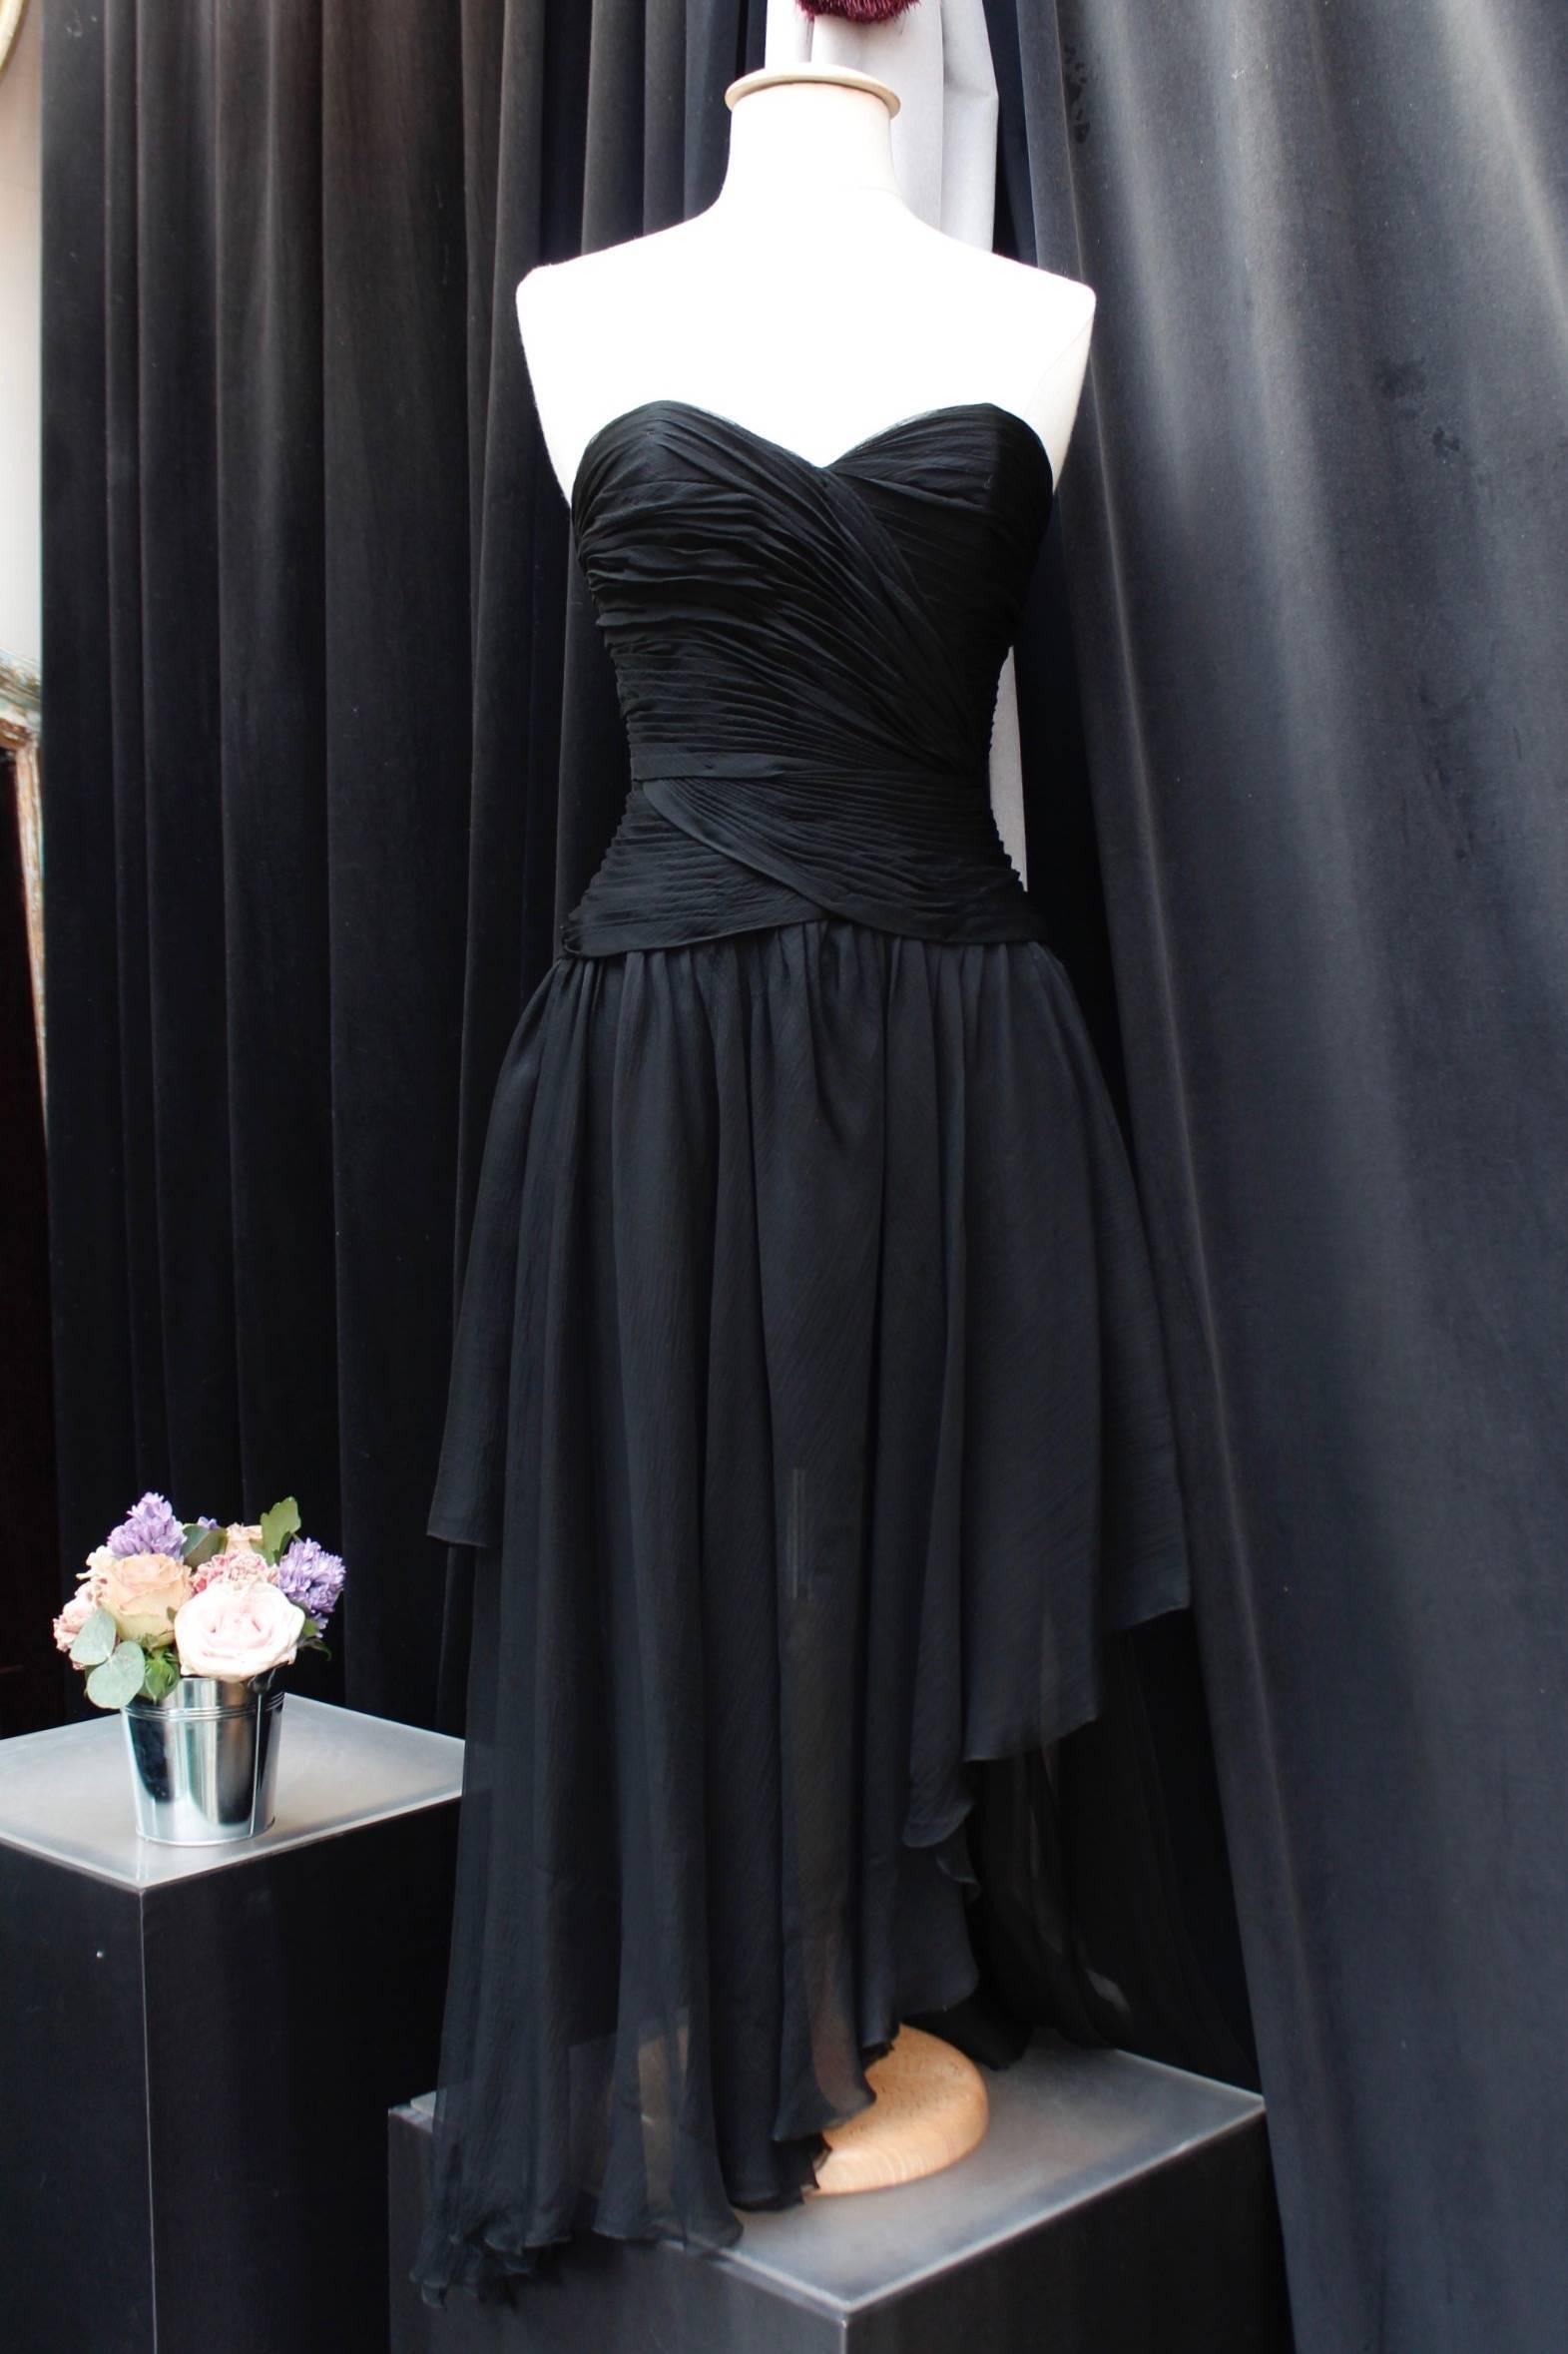 CHANEL (Made in France) Elegant evening bustier dress made of black silk chiffon featuring an asymmetrical  cut. The heart-shaped collar bustier is decorated with pleats. The skirt part is comprised of several muslin layers cut and assembled